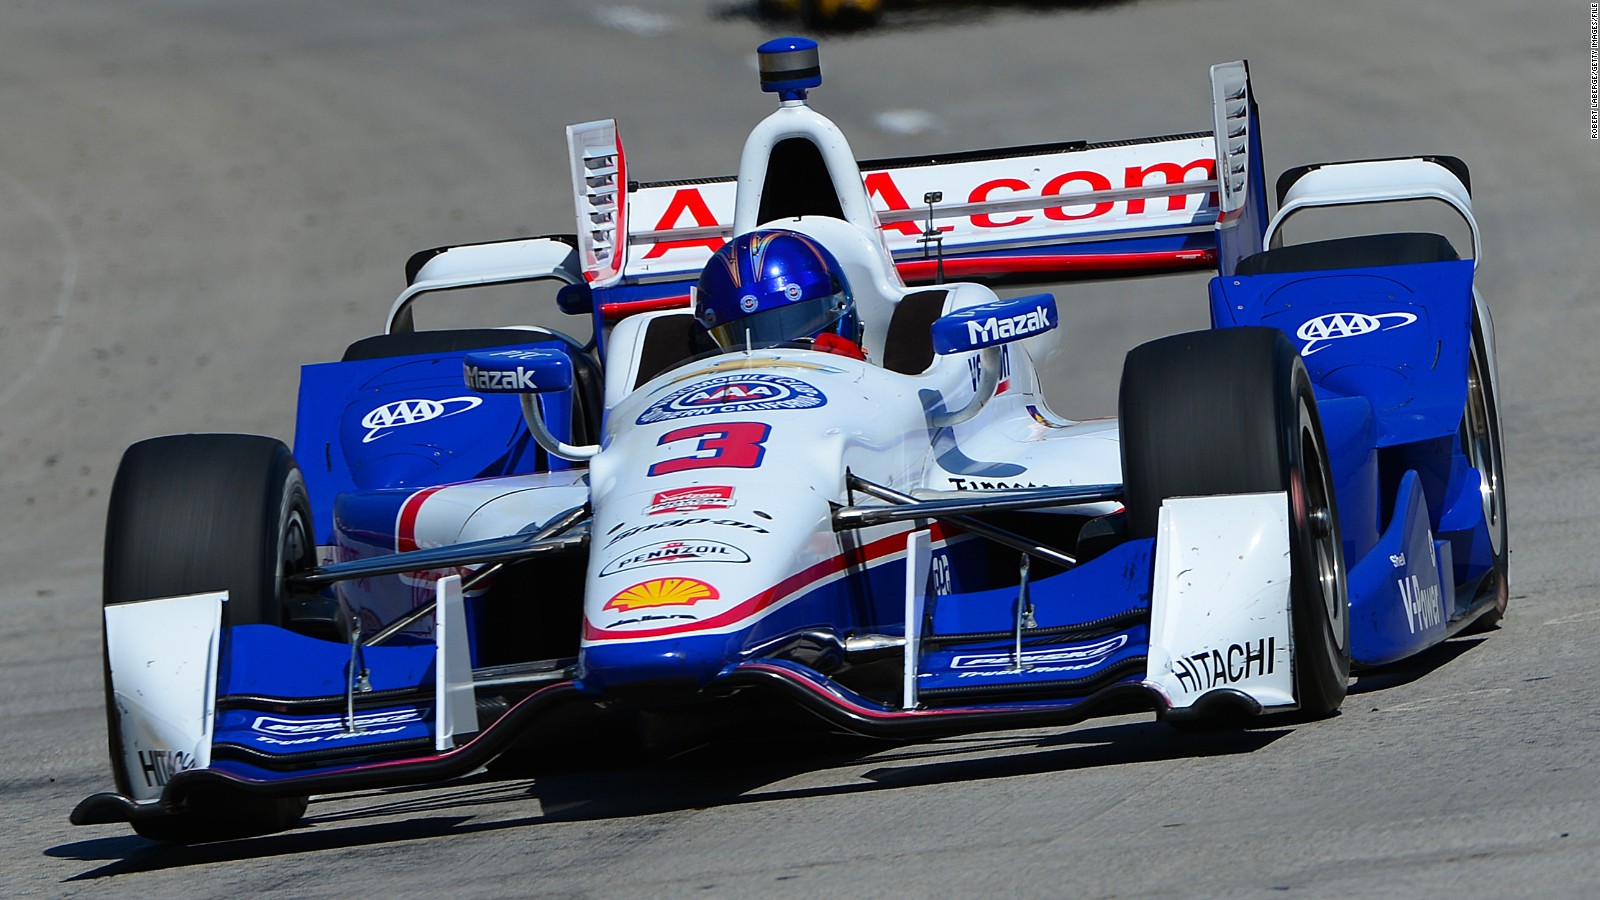 helio castroneves wins indianapolis 500 for 4th time